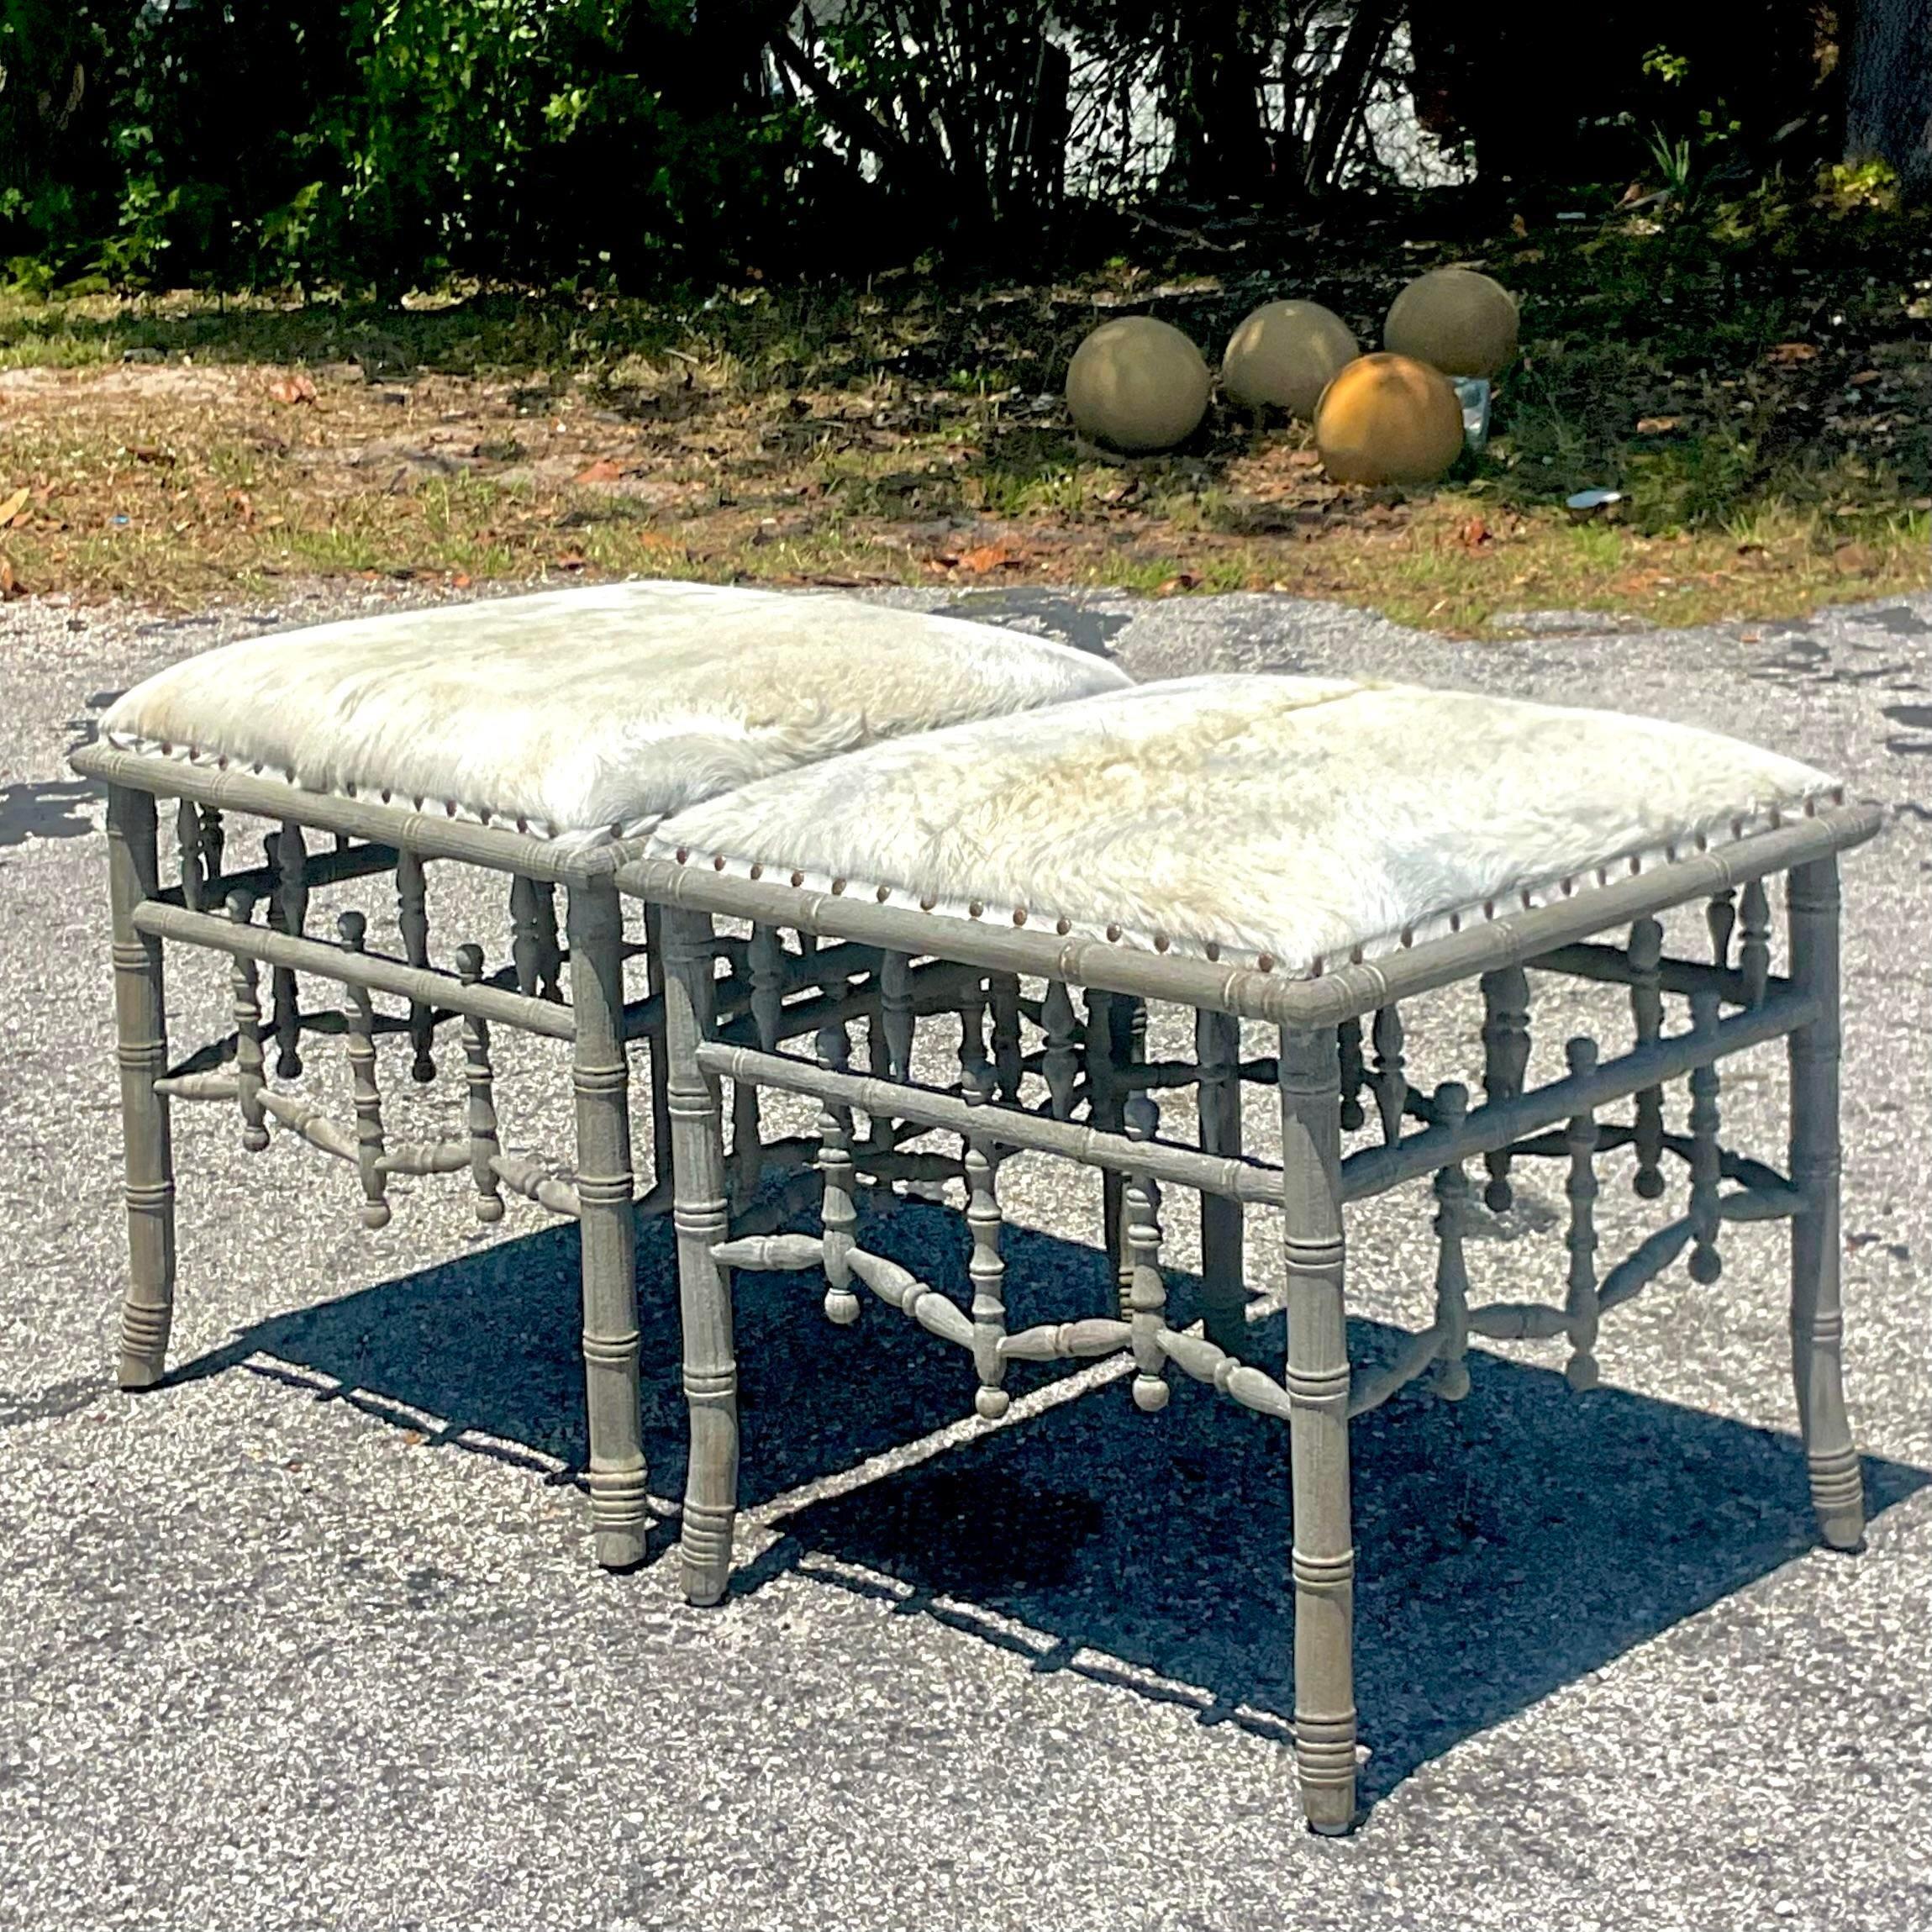 Contemporary Vintage Boho Guildmasters Fretwork Low Stools - a Pair For Sale